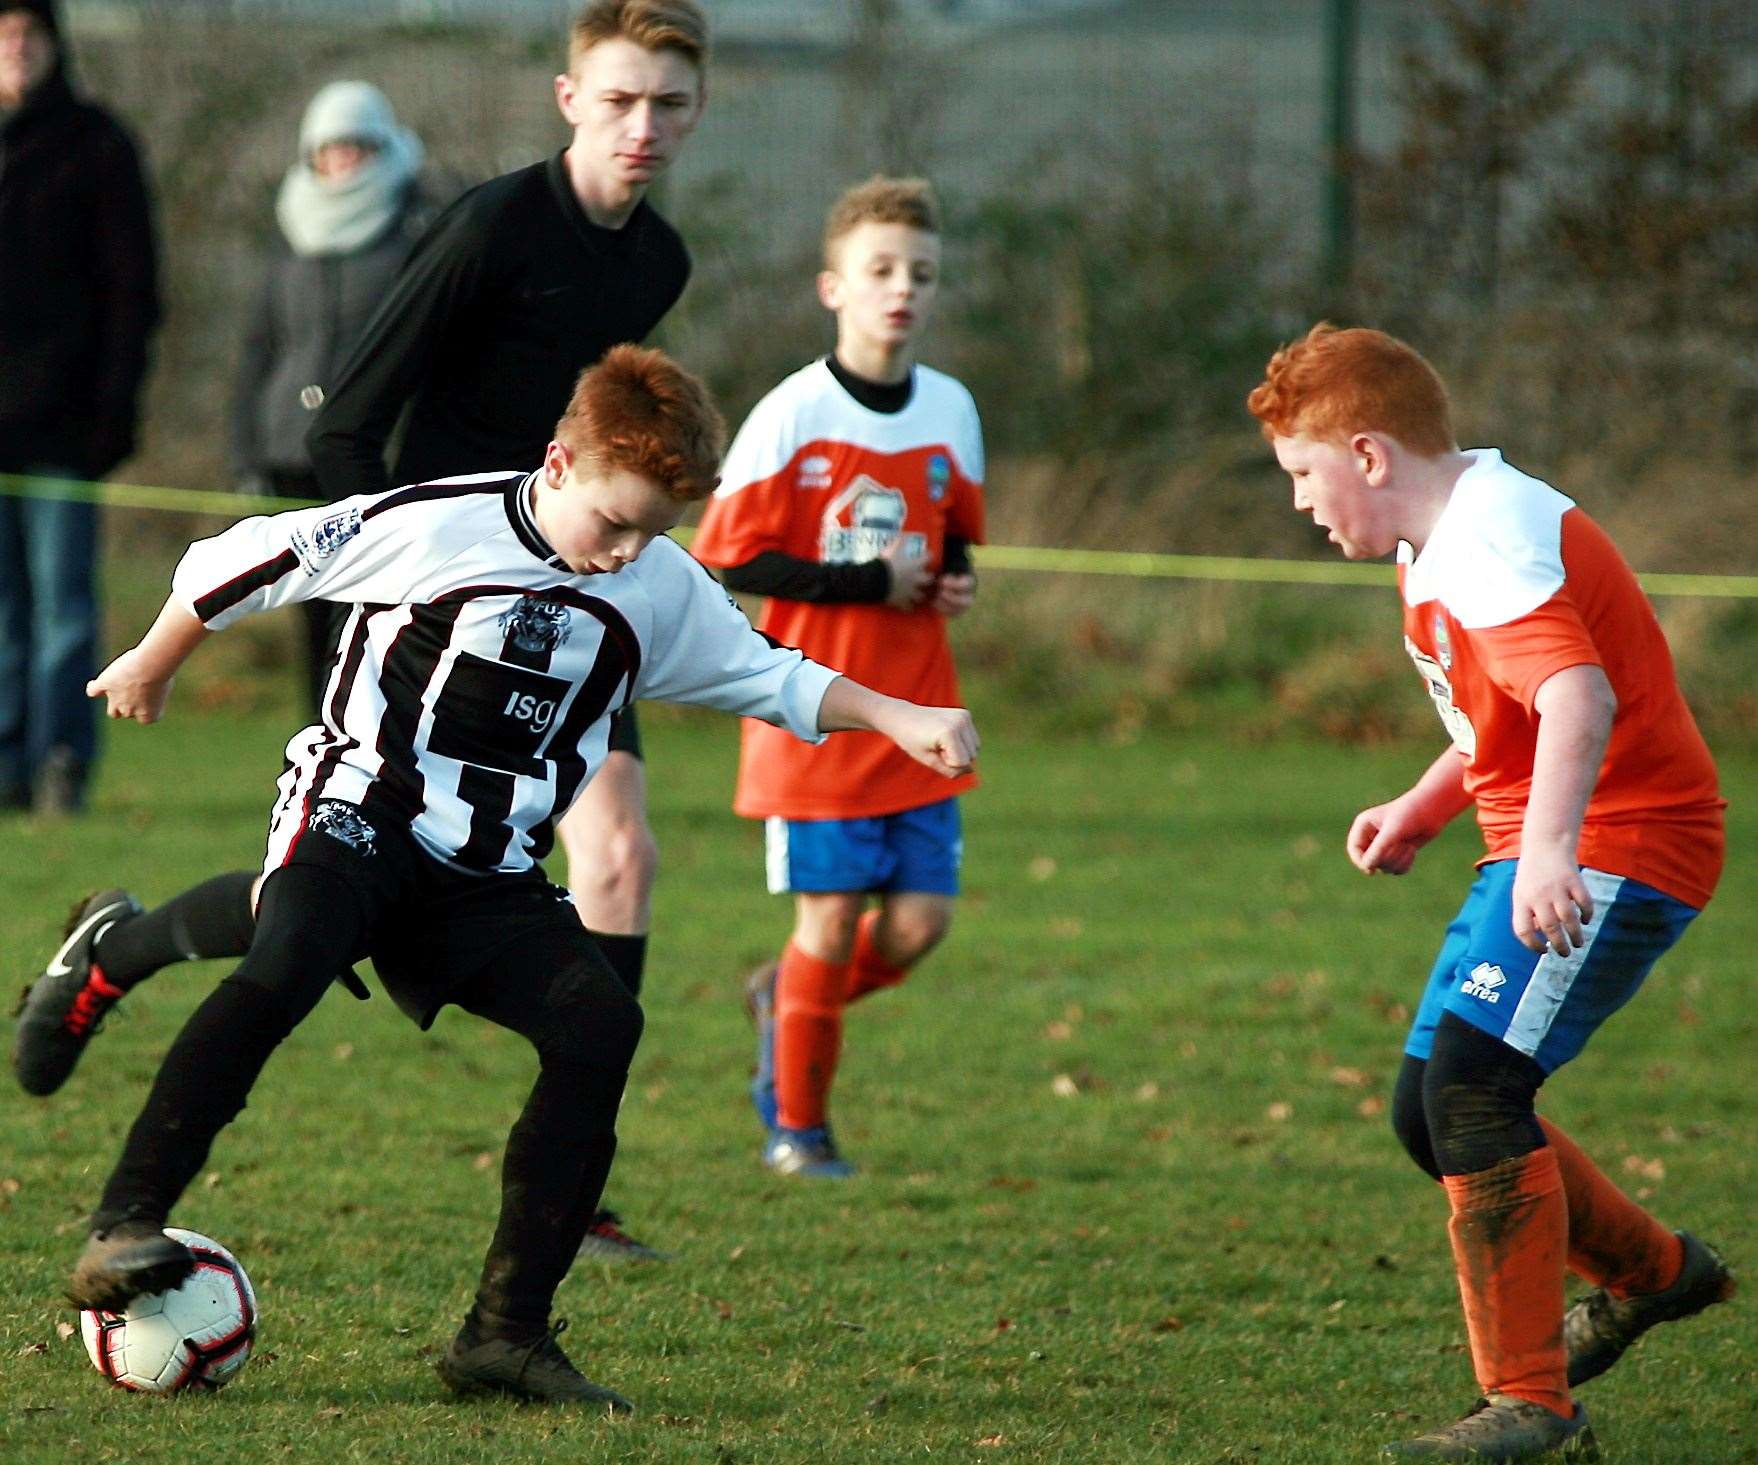 Milton and Fulston United Zebras under-12s on the ball against Cuxton 91 Dynamos under-12s. Picture: Phil Lee FM26563364